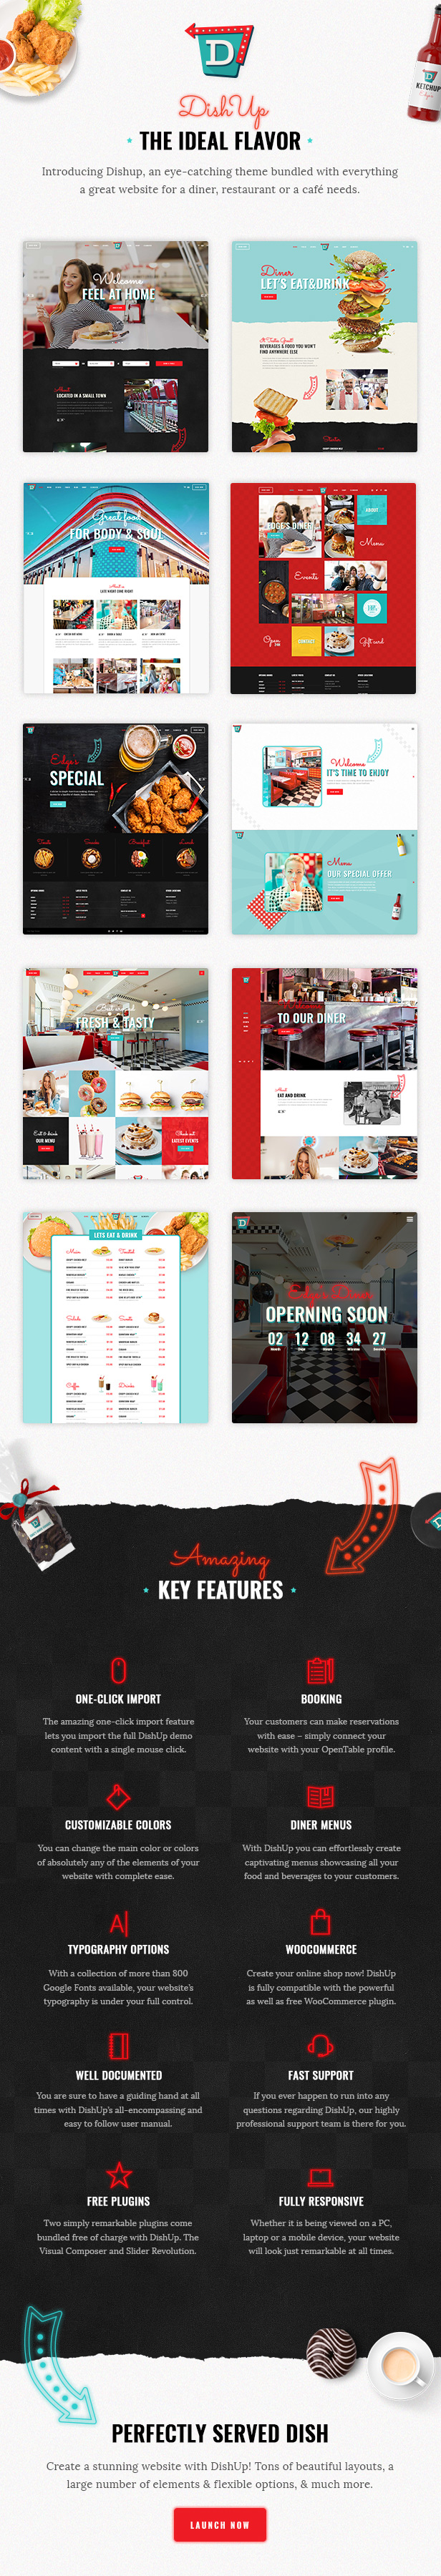 WordPress theme DishUp - A Theme for Diners and Restaurants (Restaurants & Cafes)